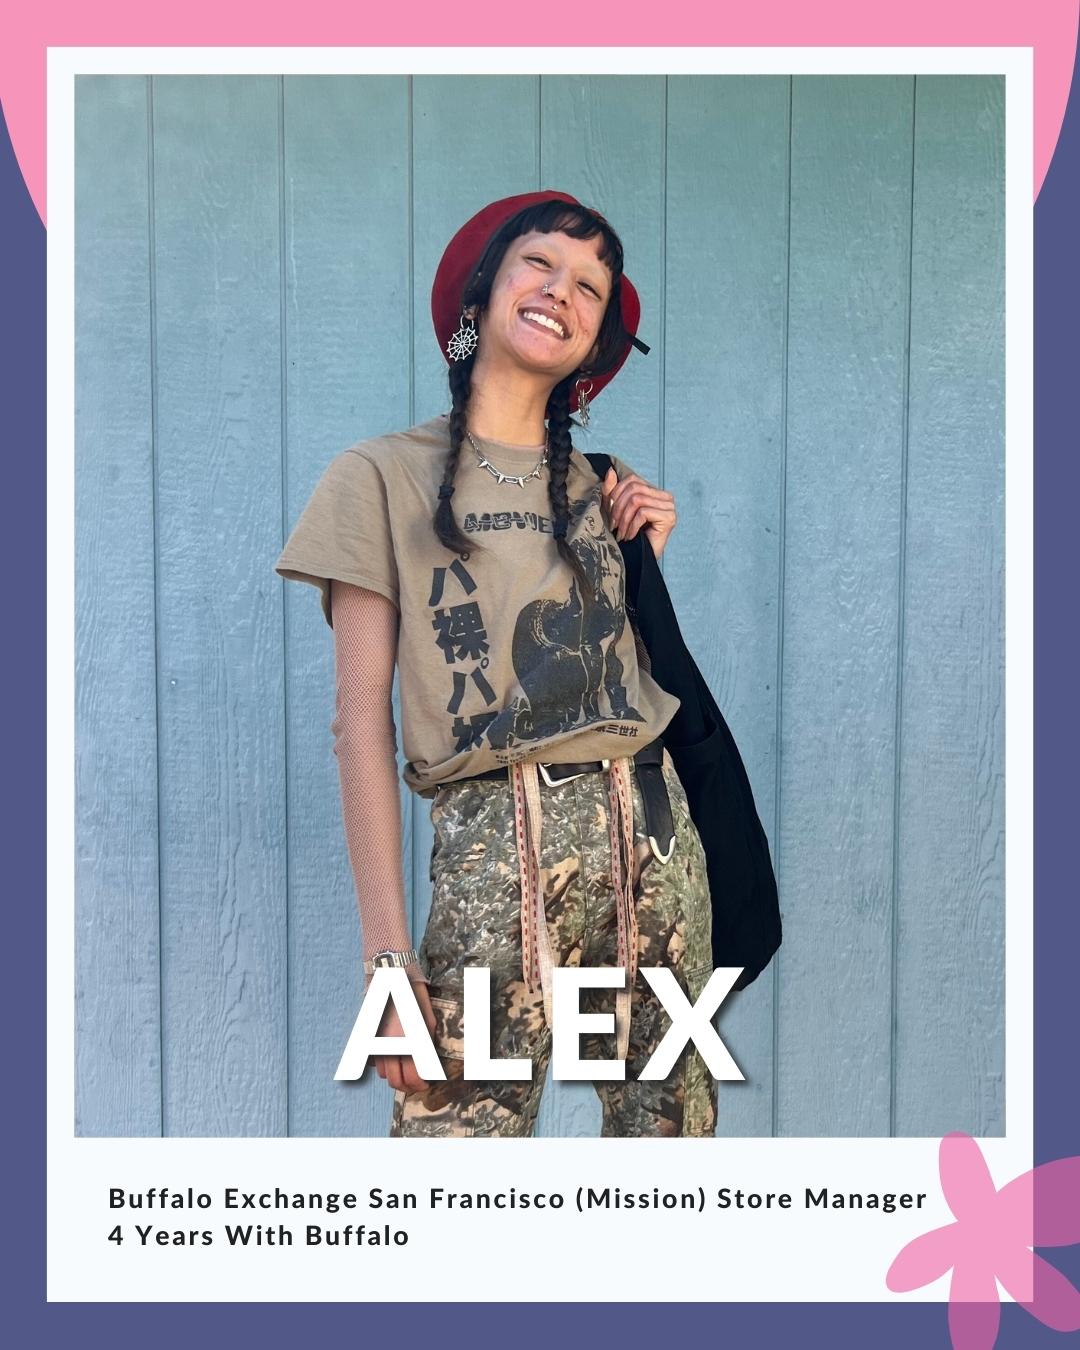 Alex wearing camo outfit; reads BE San Francisco (Mission) Store Manager - 4 Years With Buffalo